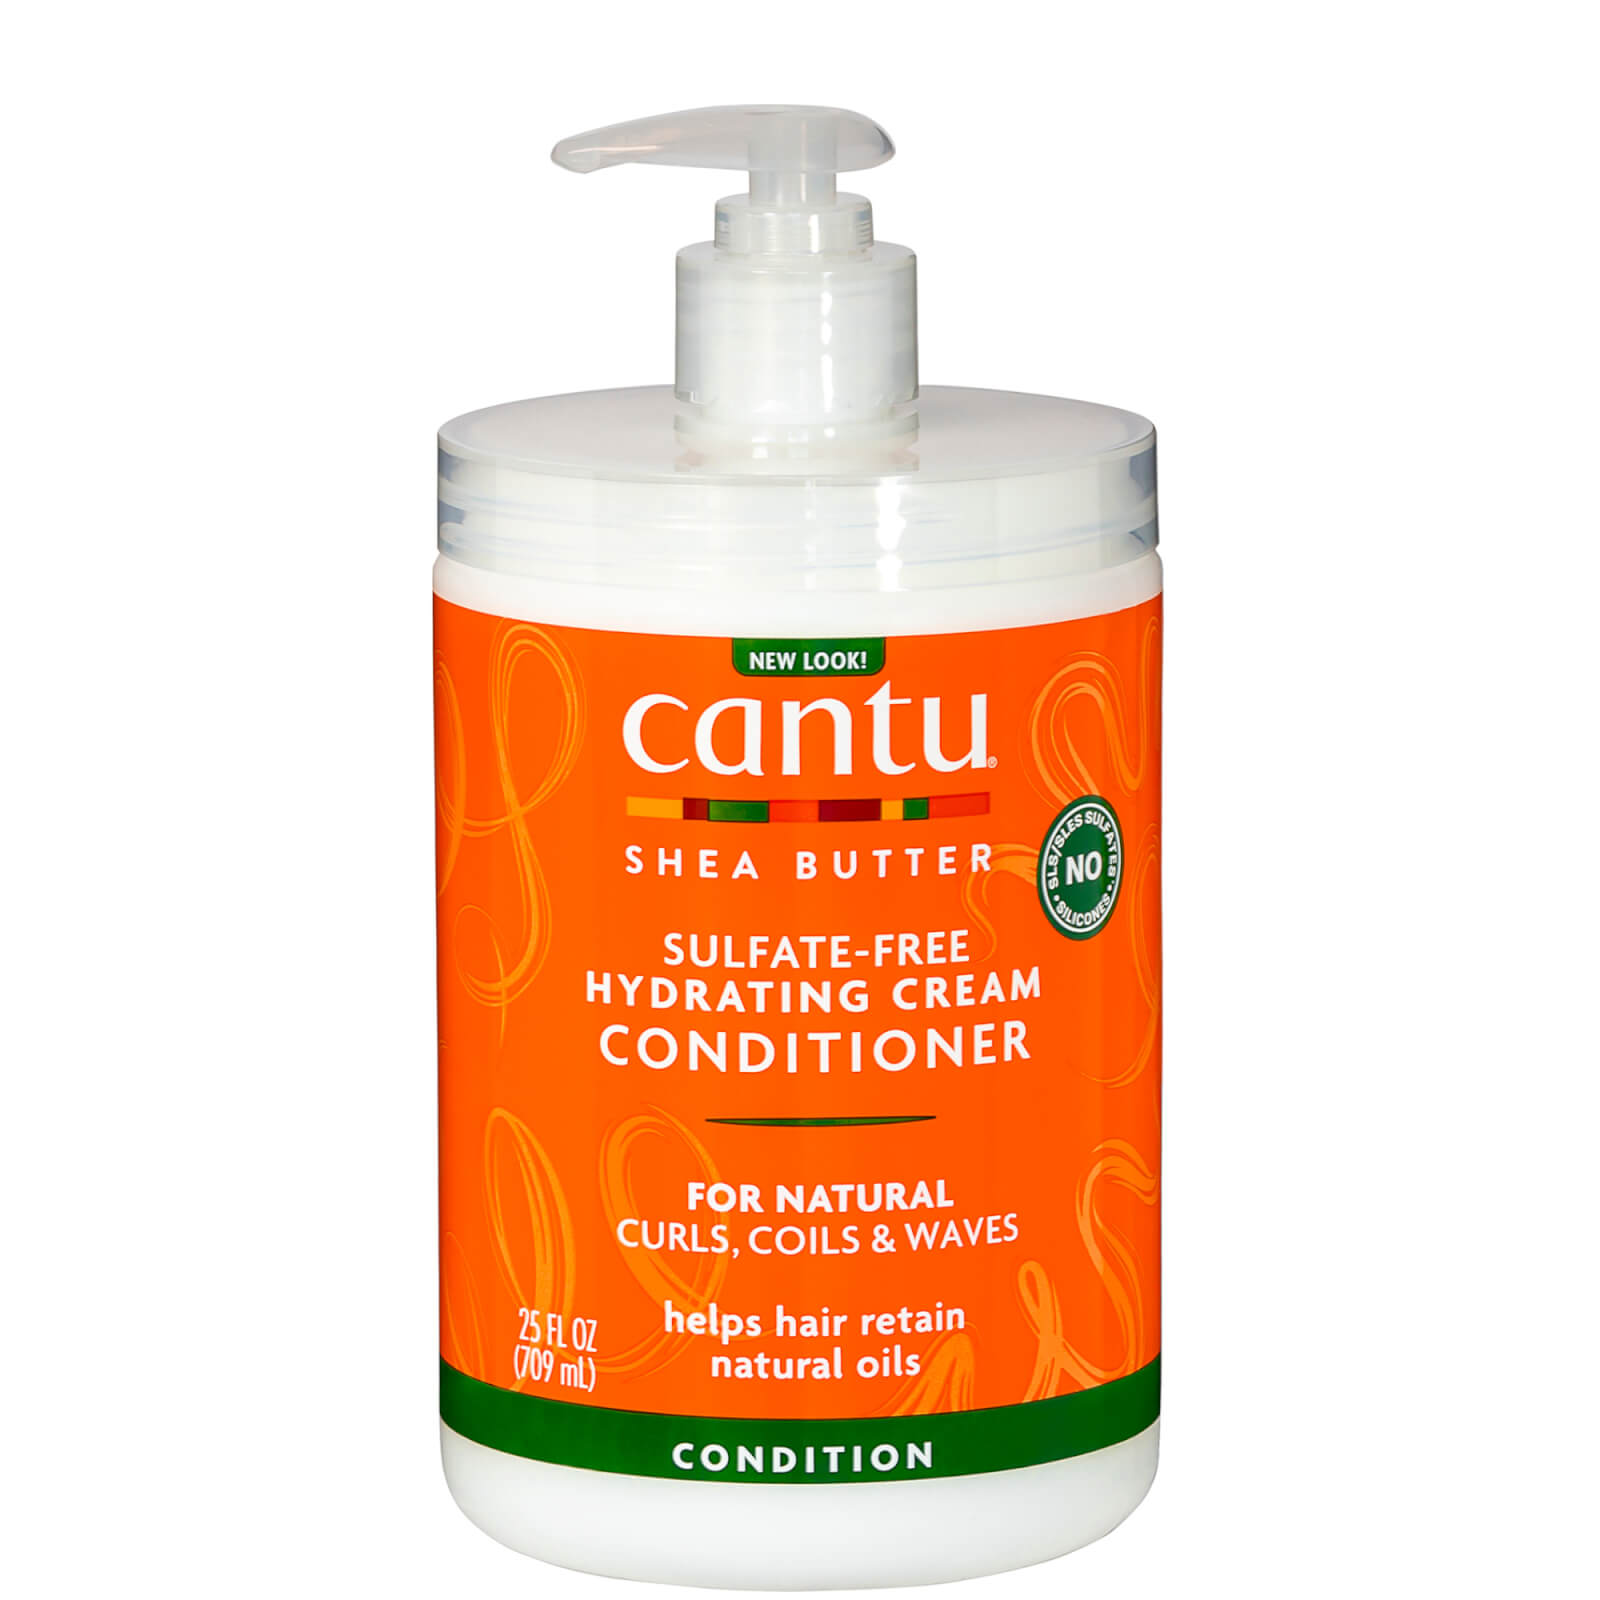 Image of Cantu Shea Butter for Natural Hair Hydrating Cream Conditioner - Salon Size 24 oz